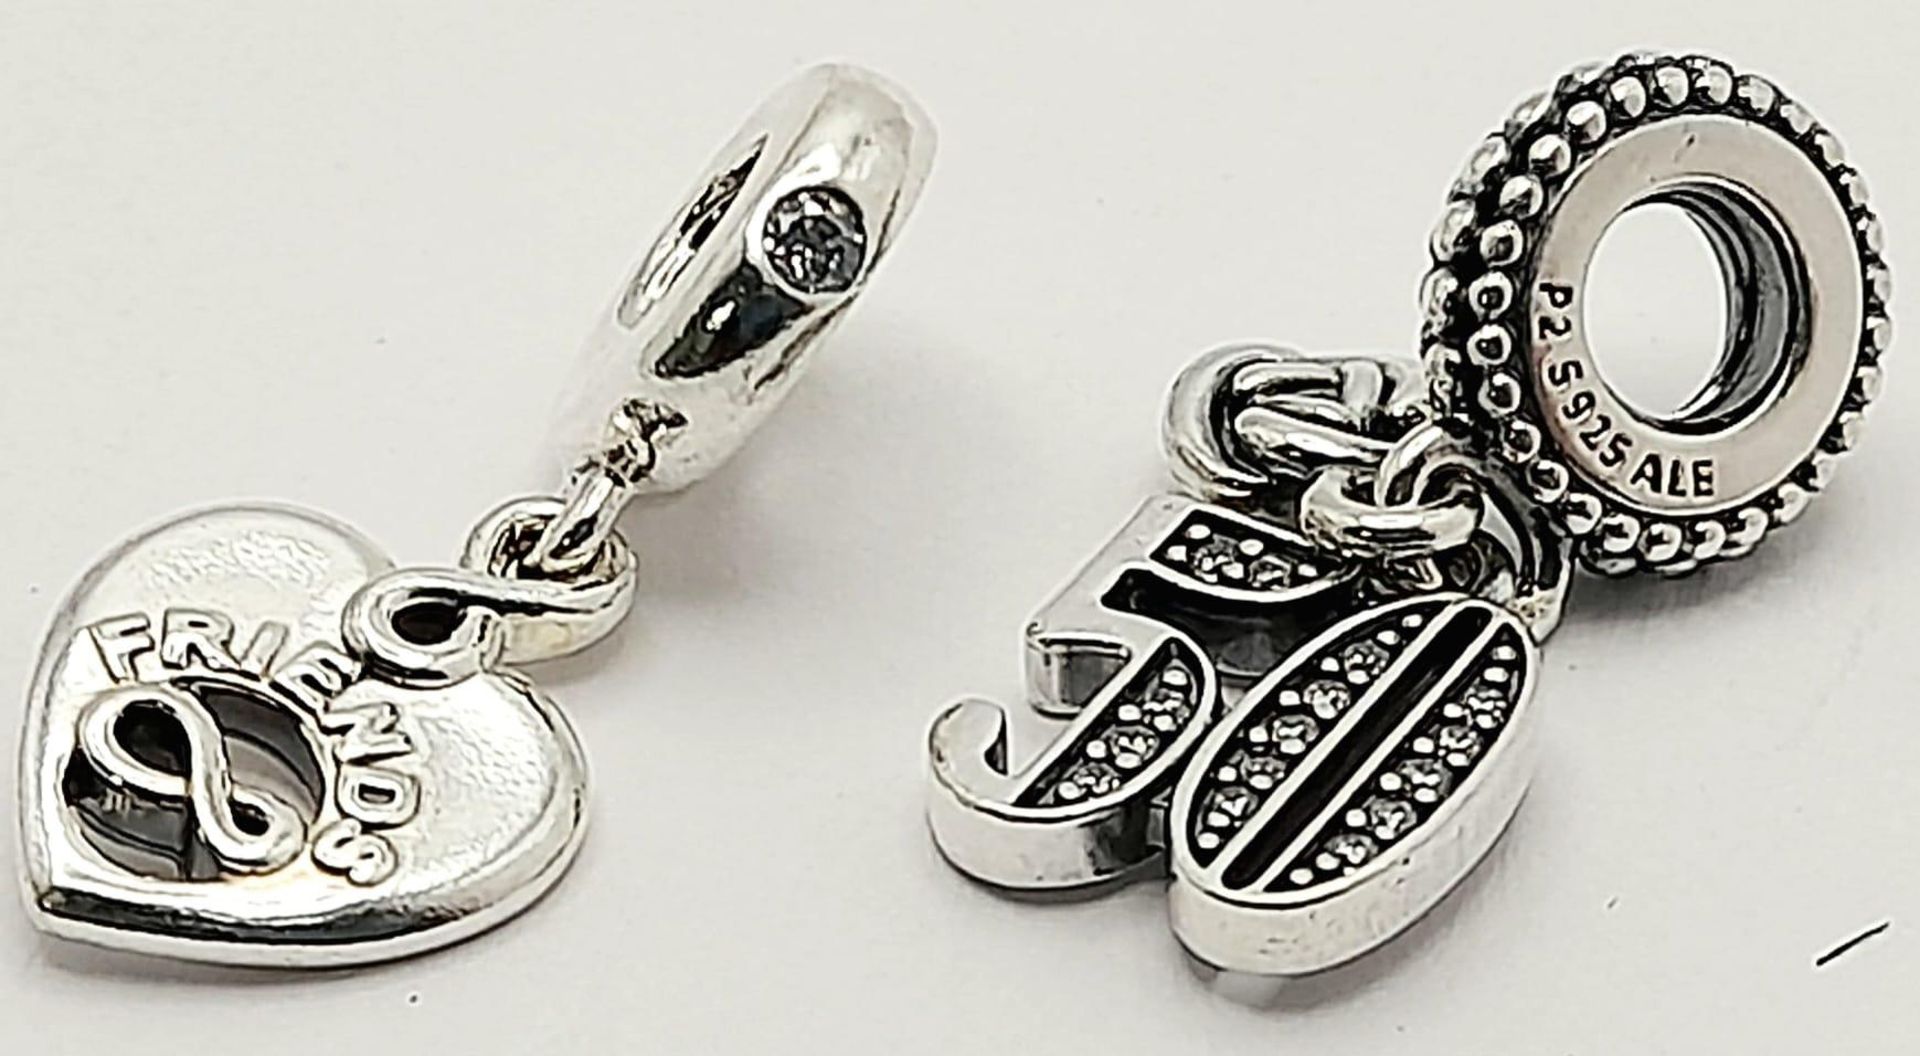 2X fancy Pandora 925 silver charms/pendants include a "Friend Forever" heart and a silver stone - Image 9 of 9